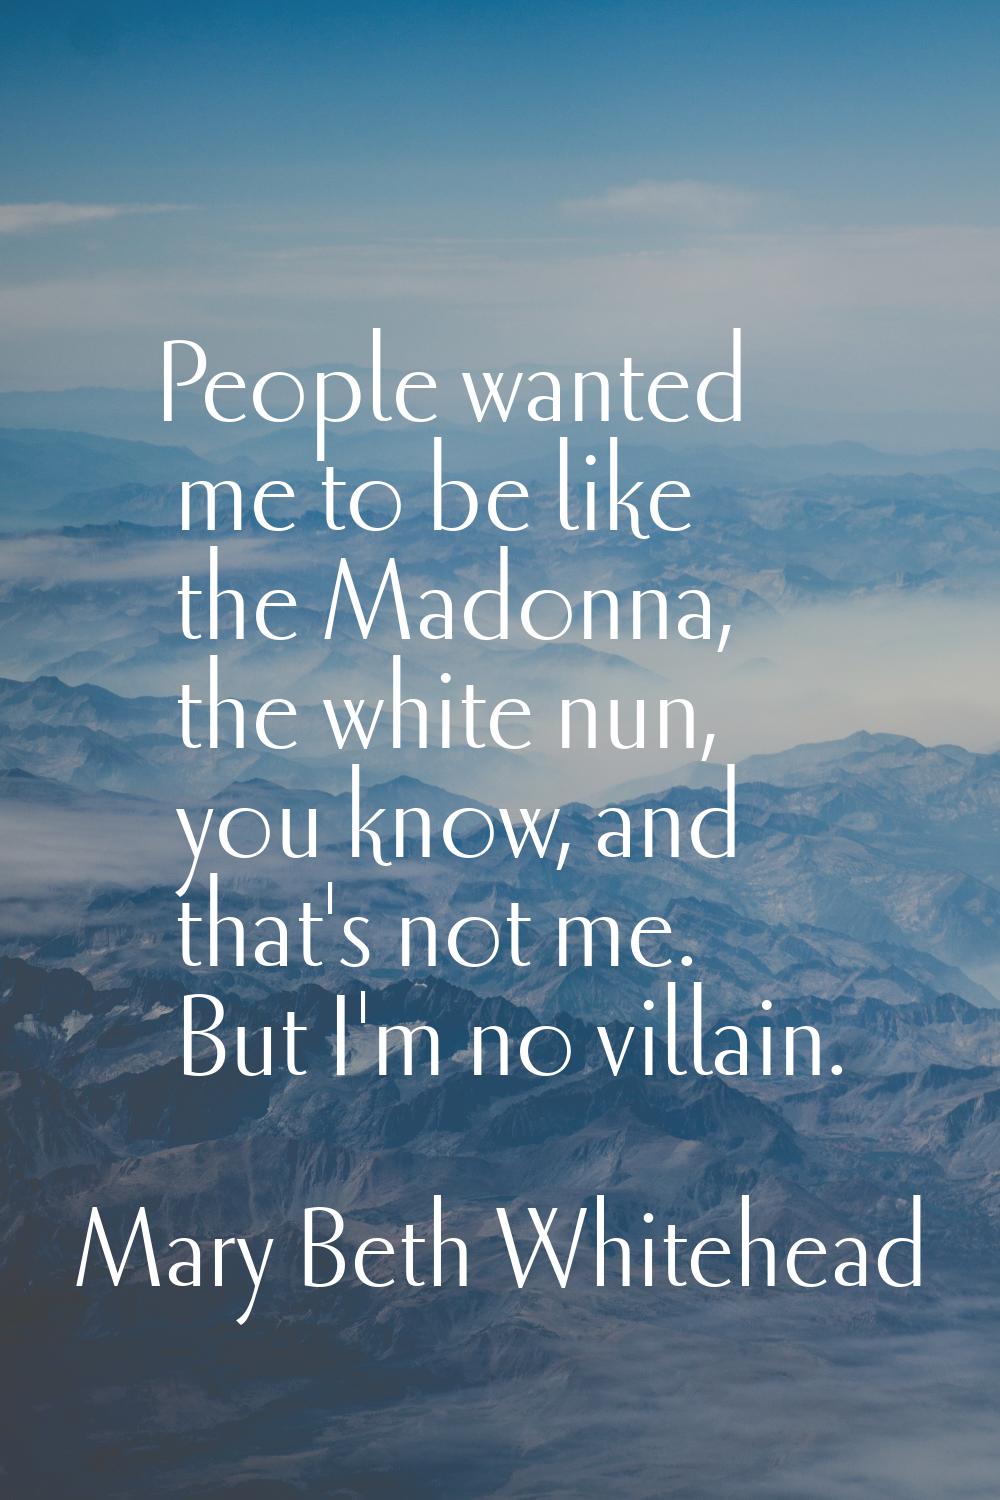 People wanted me to be like the Madonna, the white nun, you know, and that's not me. But I'm no vil